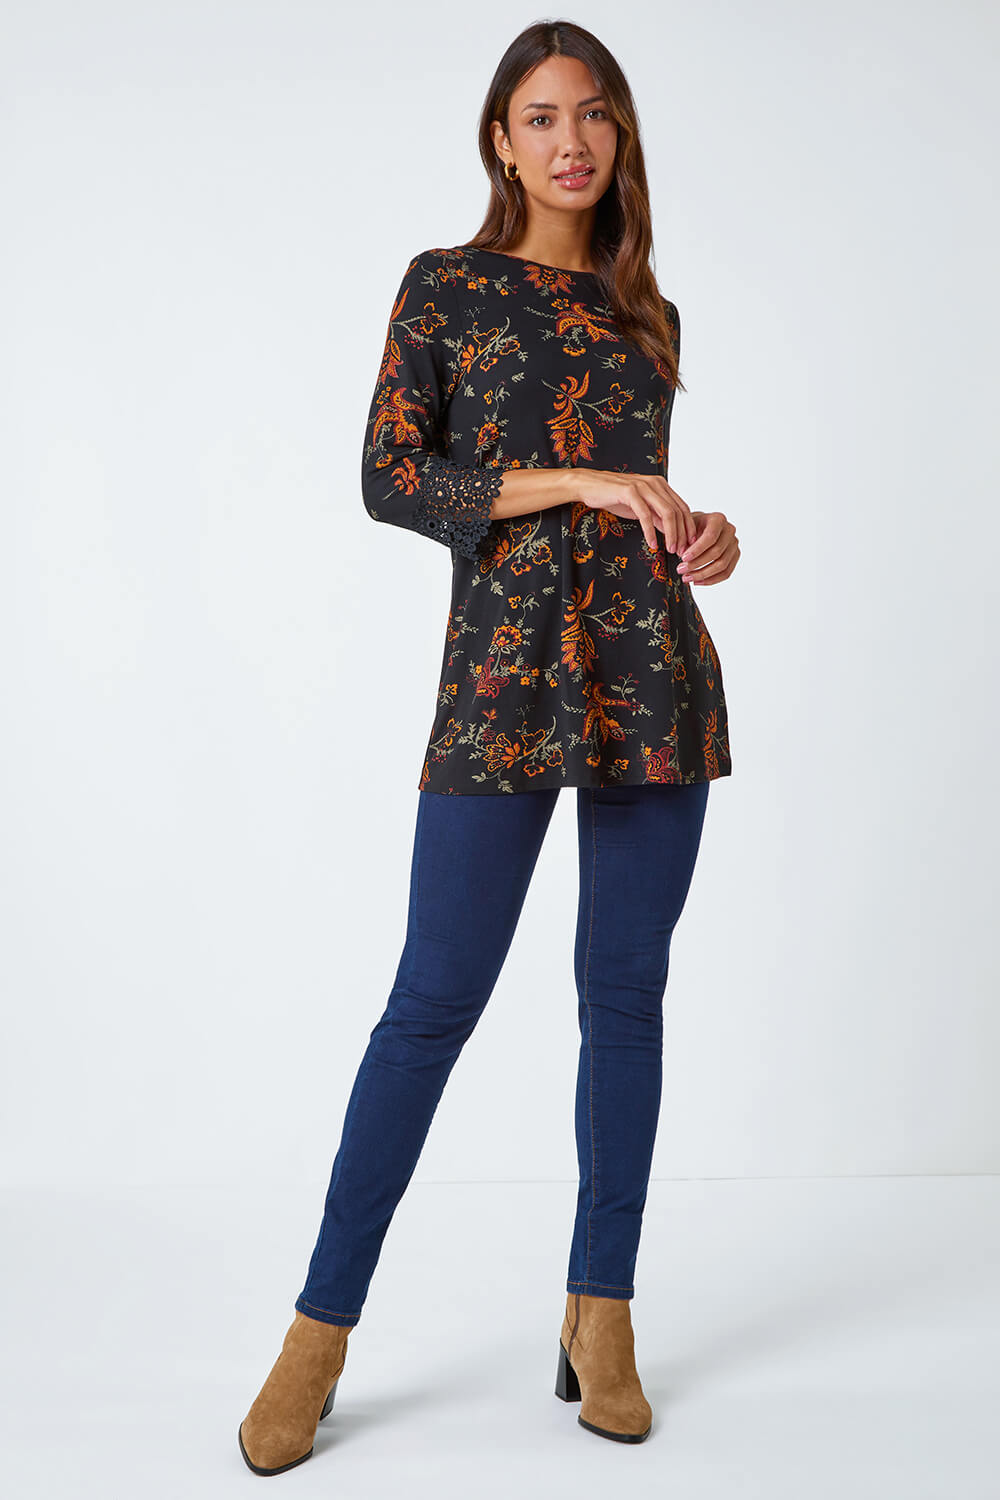 Ochre Paisley Print Lace Trim Stretch Top, Image 2 of 5